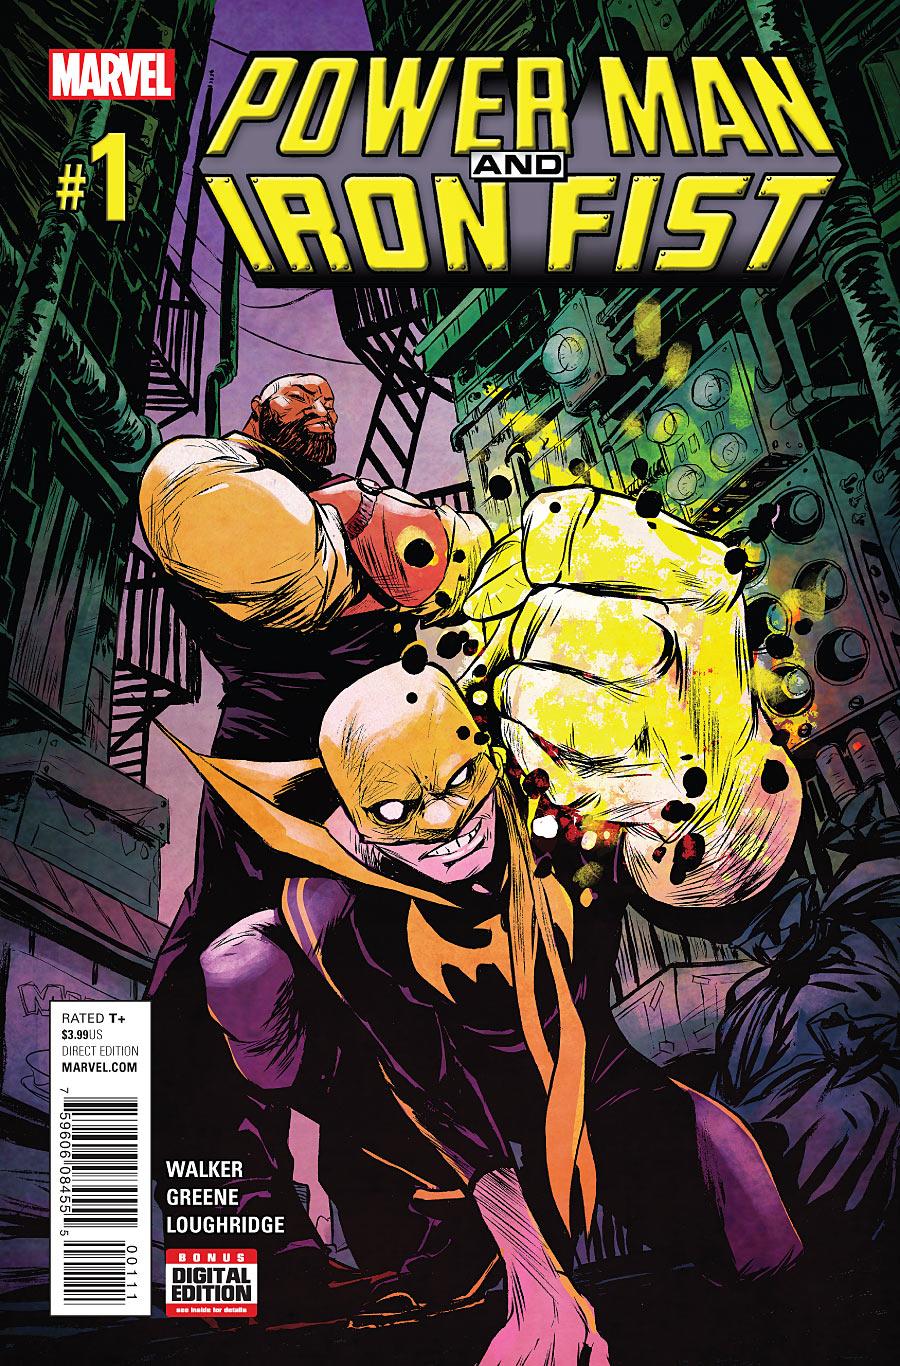 Power Man and Iron Fist Vol. 3 #1